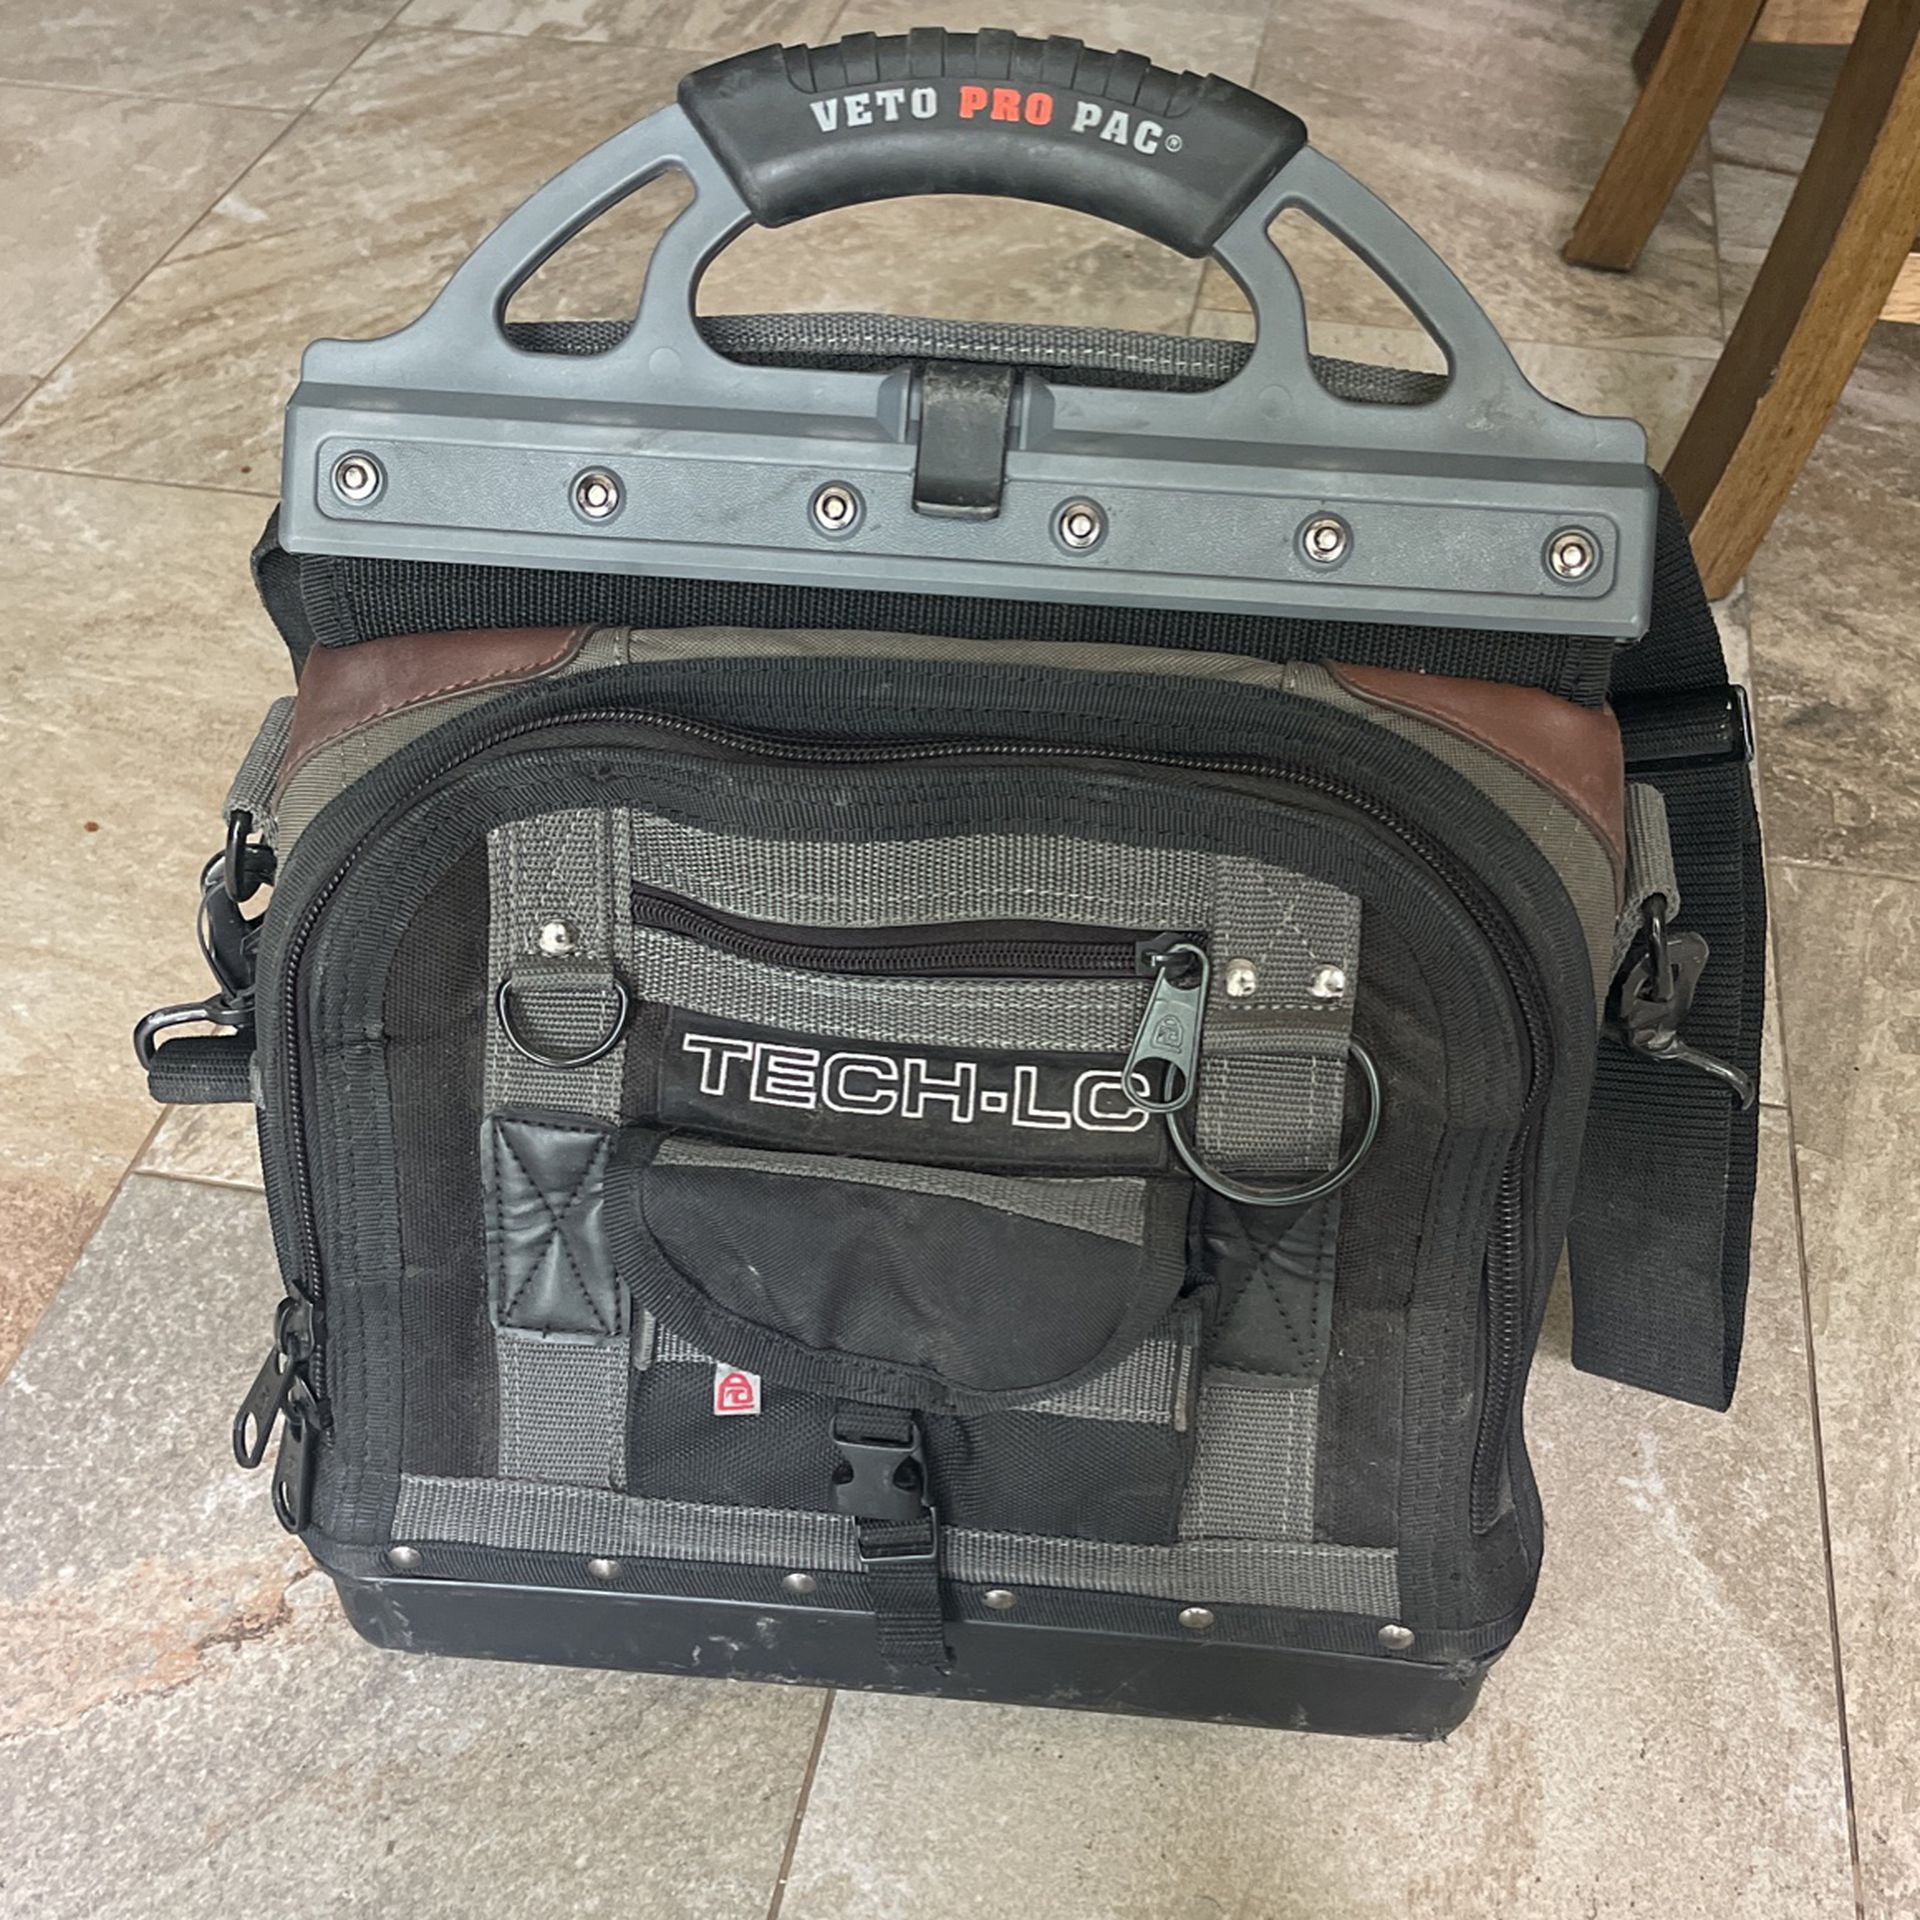 Veto Pro PAC Tech-LC for Sale in Houston, TX - OfferUp